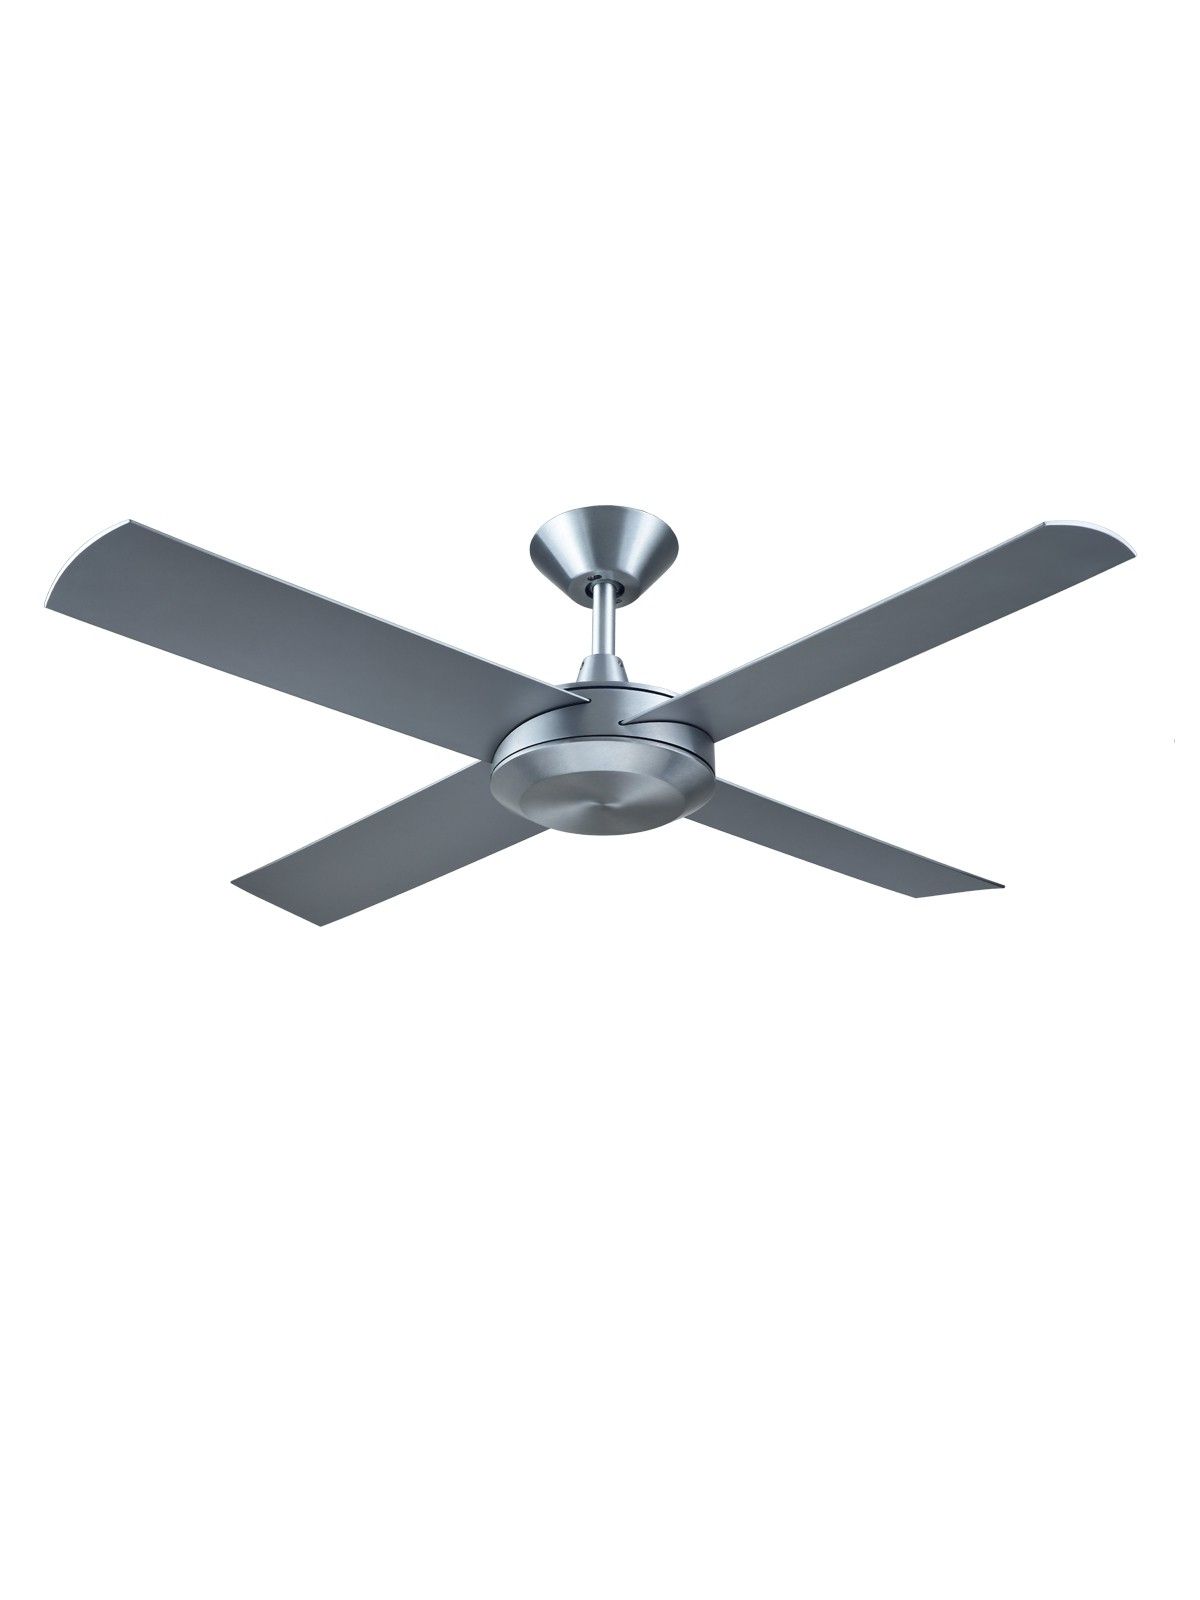 Most Current Concept Ii 2014 132cm Timber Blade Fan In Brushed Aluminium Inside Concept Ii 3 Blade Ceiling Fans (View 15 of 20)